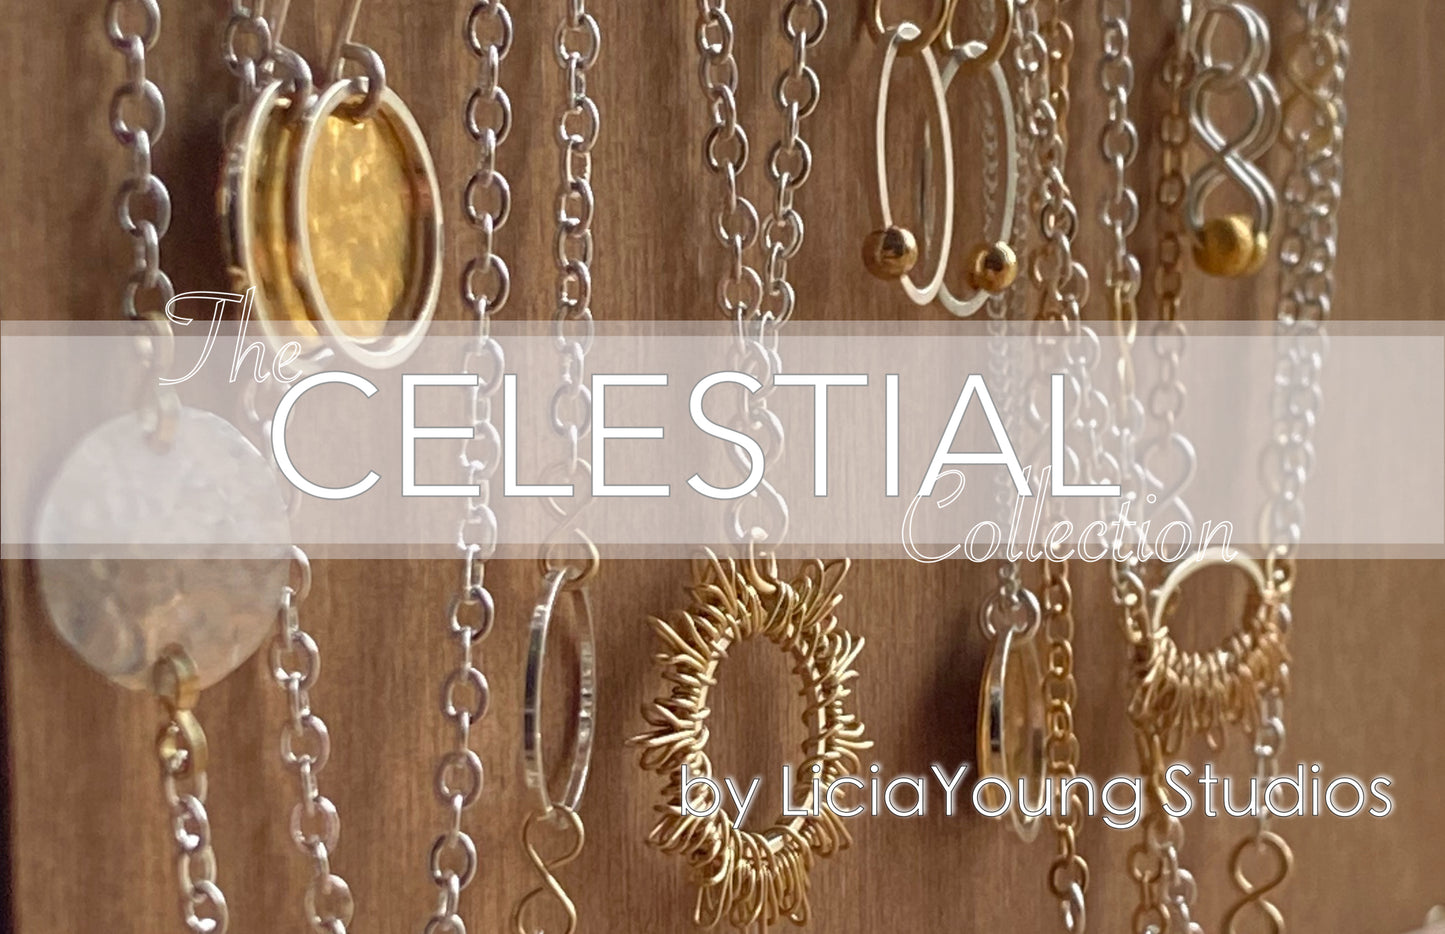 Ethereal.  The Celestial Collection